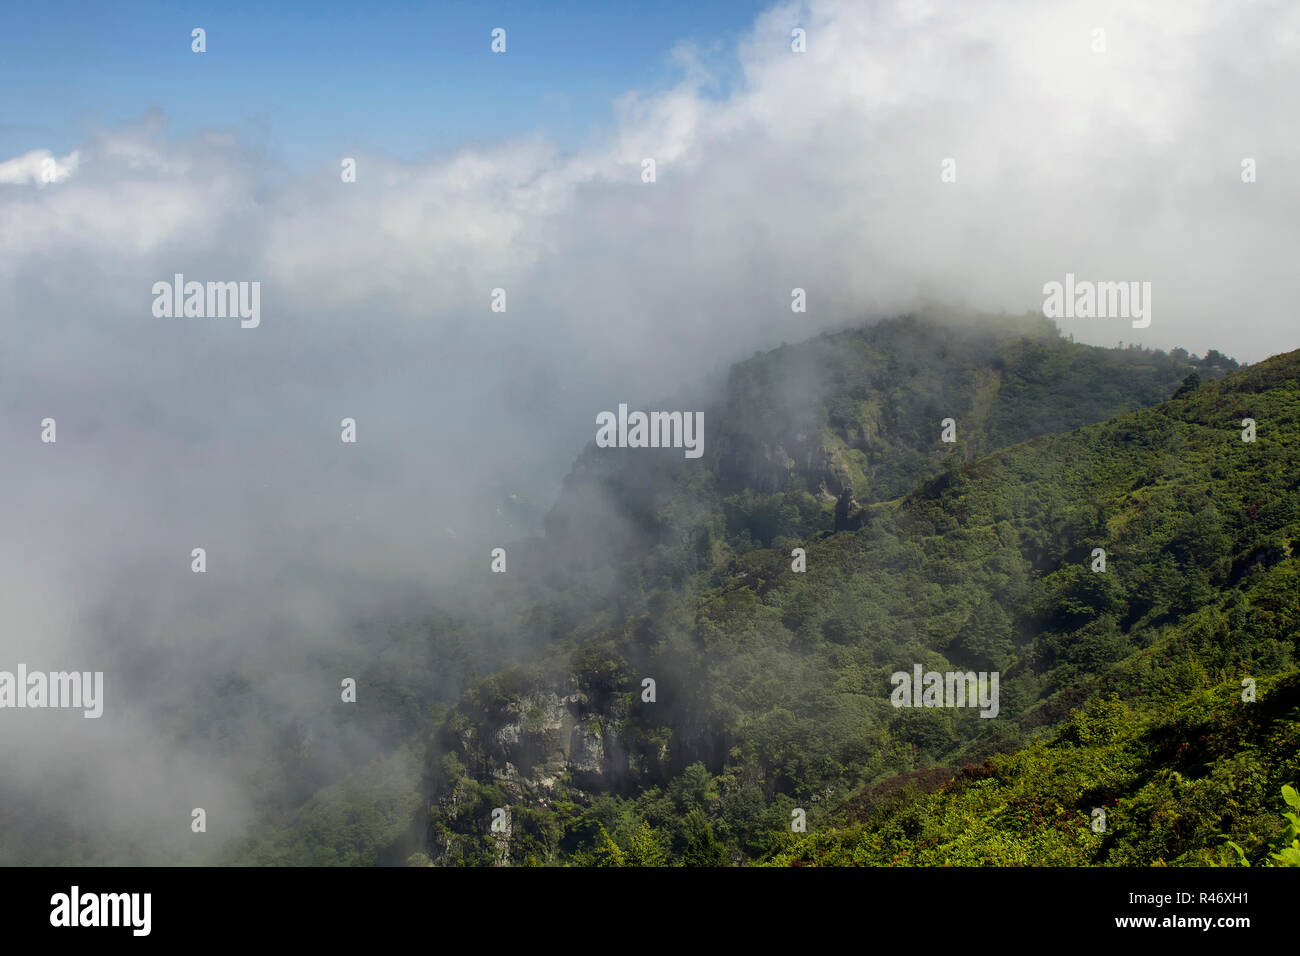 View of top of the mountain with trees in fog creating beautiful nature scene. The image is captured in Trabzon/Rize area of Black Sea region located  Stock Photo